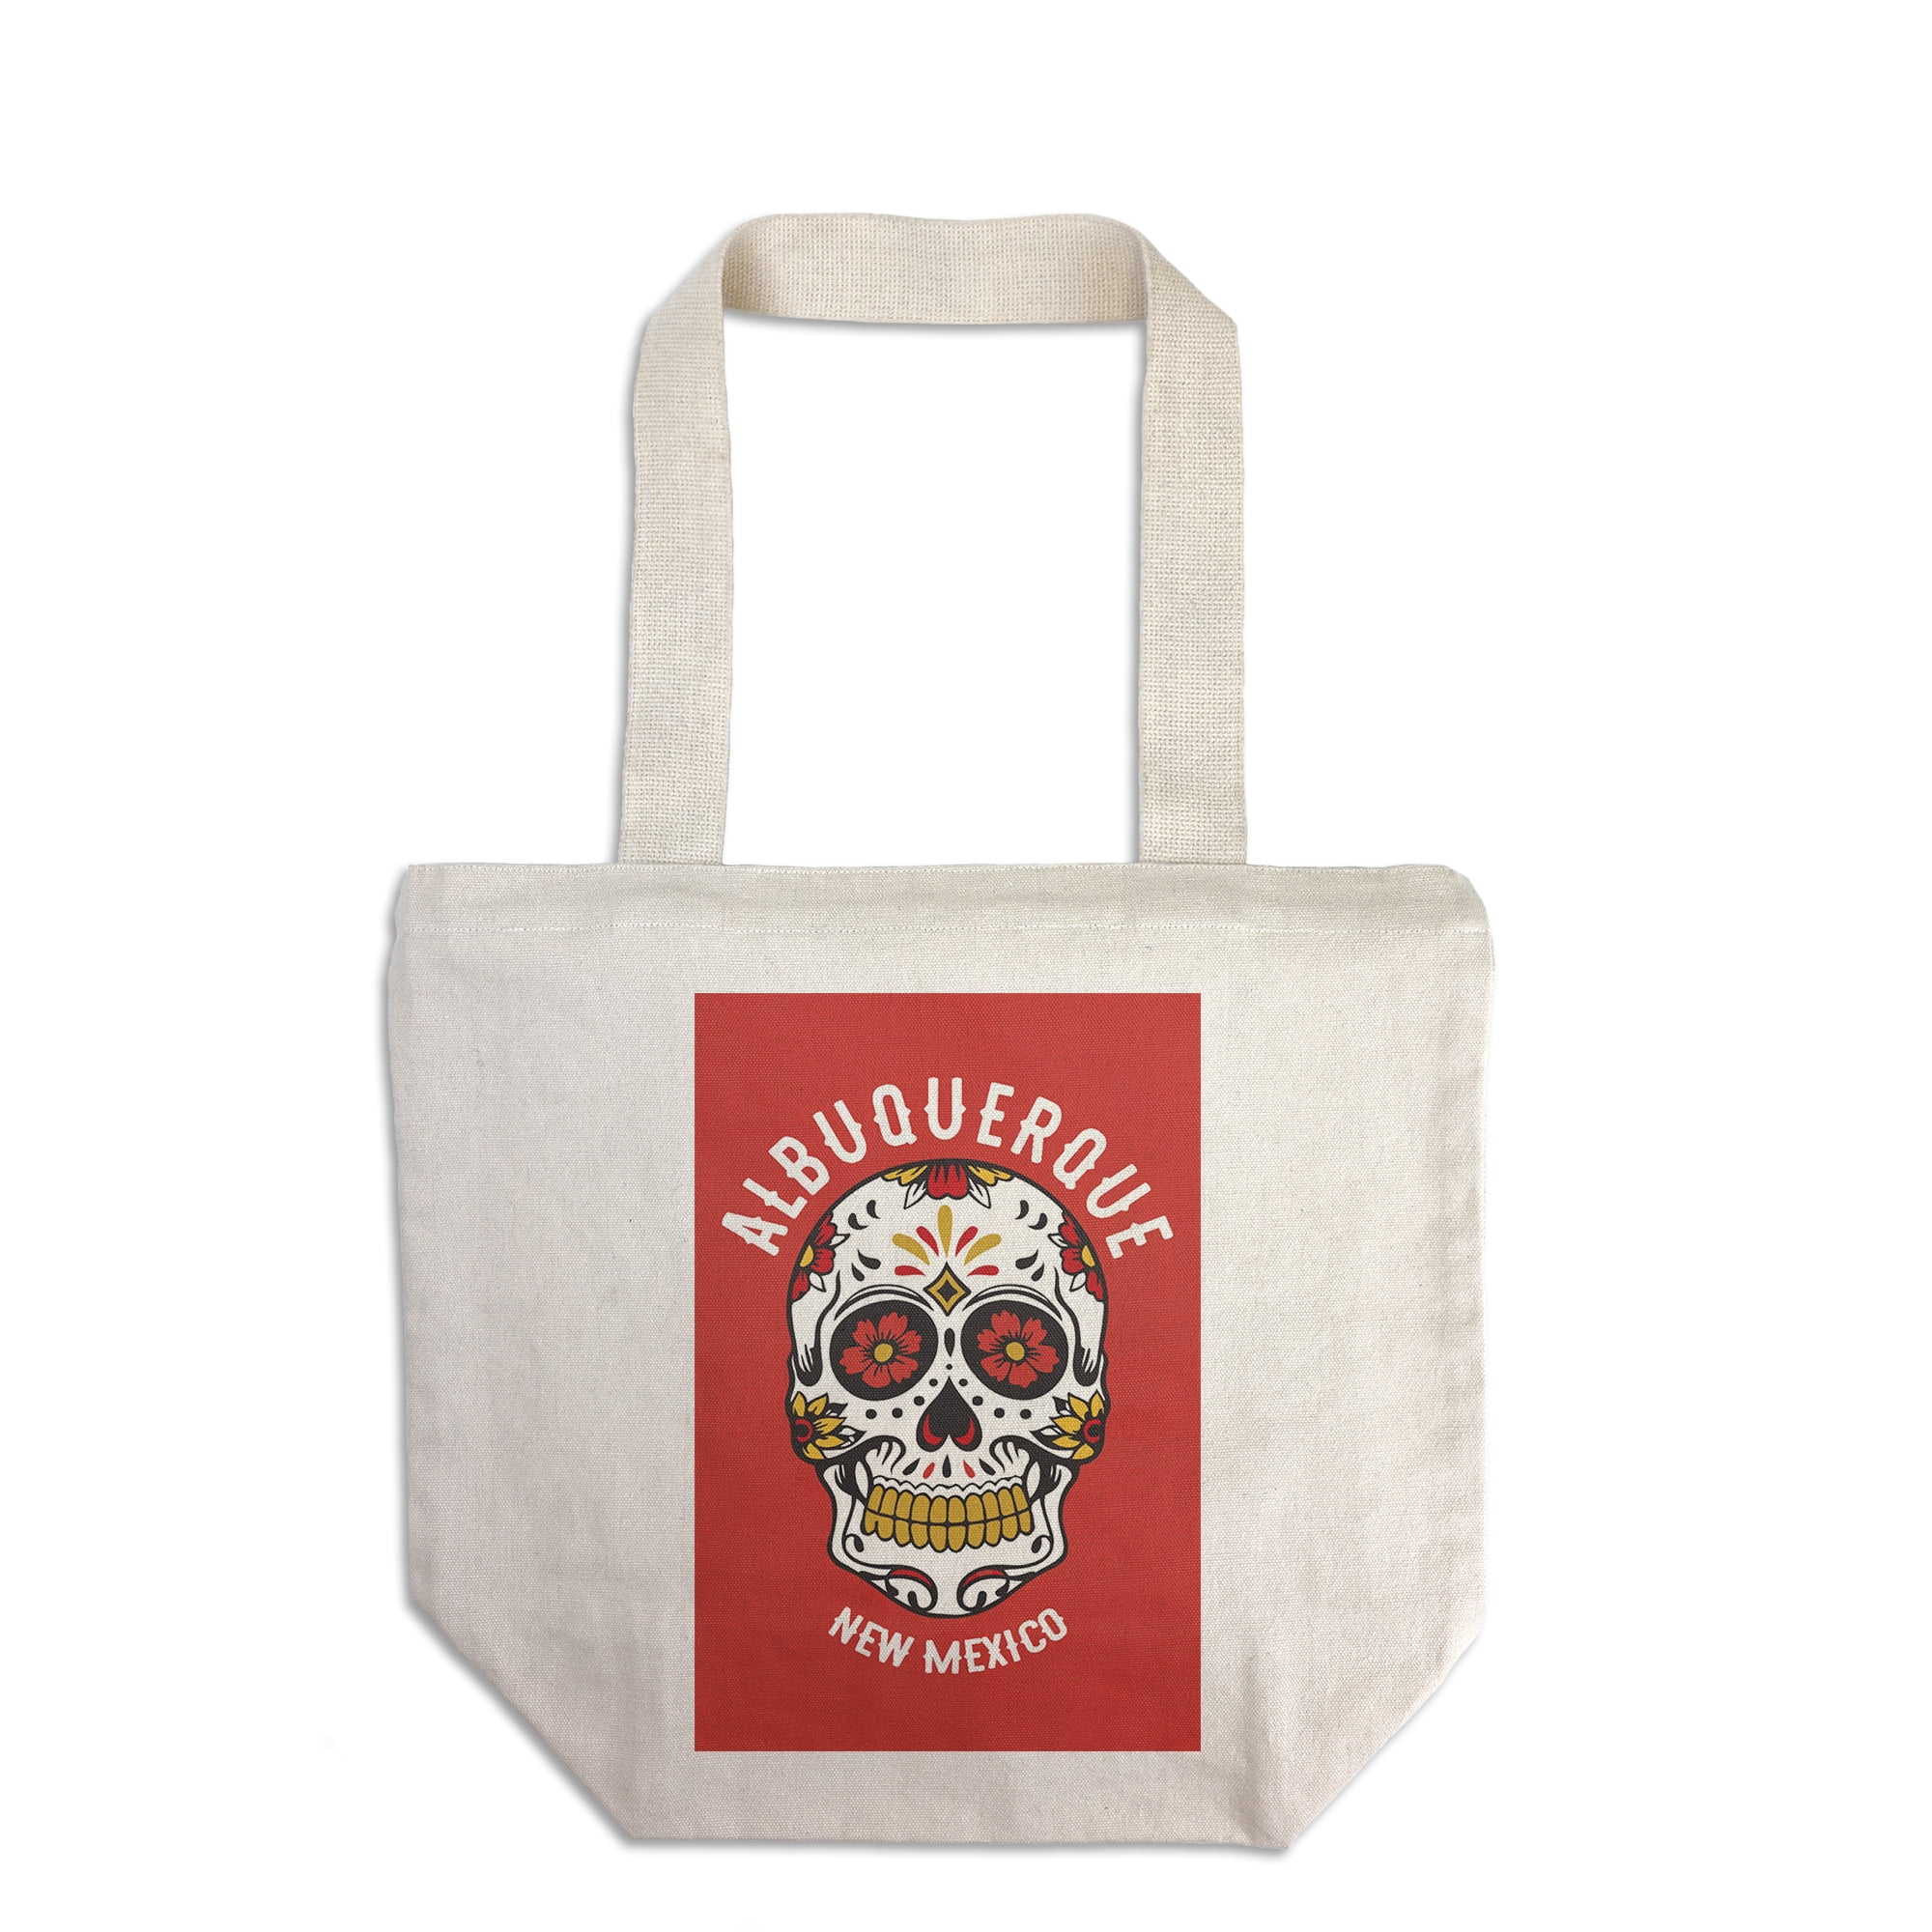 fordel Grundlæggende teori kollidere Albuquerque, New Mexico, Sugar Skull and Flower Pattern, Red and Gold,  Contour (100% Cotton Canvas Reusable Tote Bag) - Walmart.com